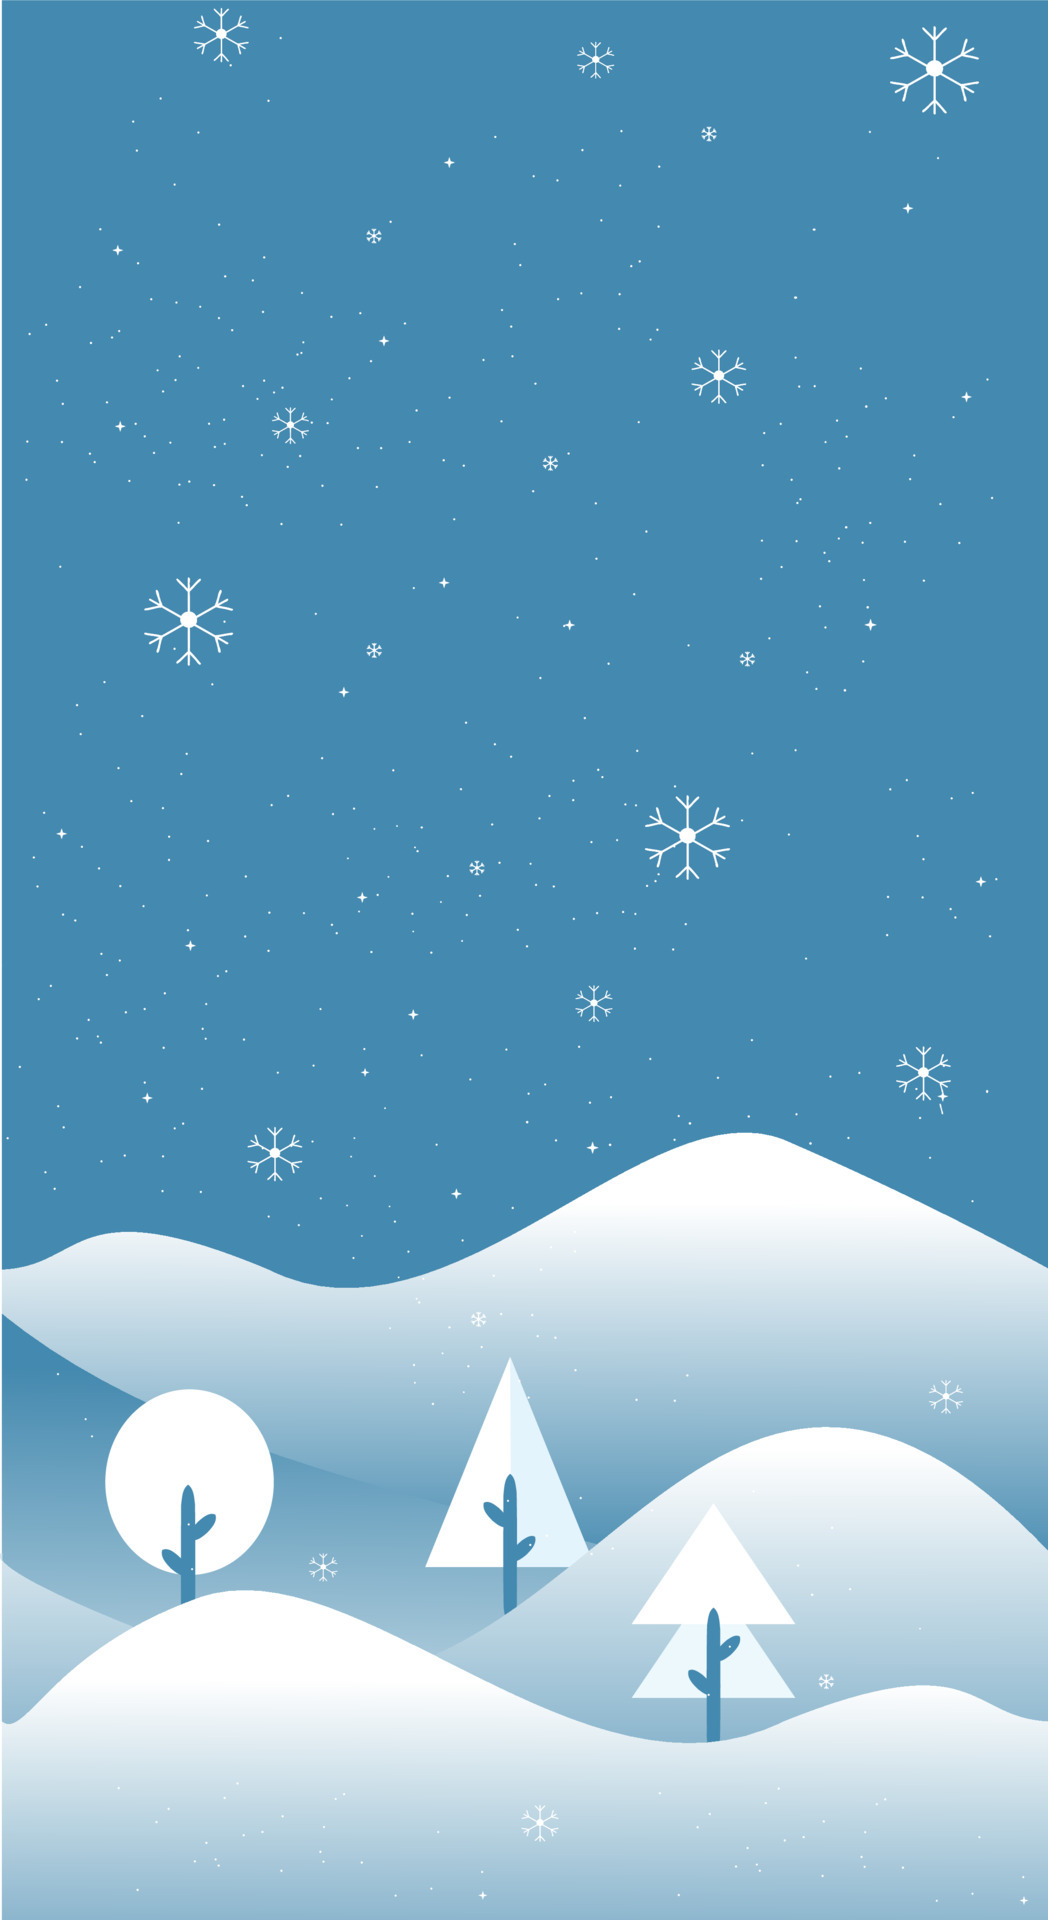 Winter landscape illustration in flat style with design snow and tree in noon view. Aesthetic winter season background. Banner for mobile phone screen saver theme, lock screen and wallpaper. Vector